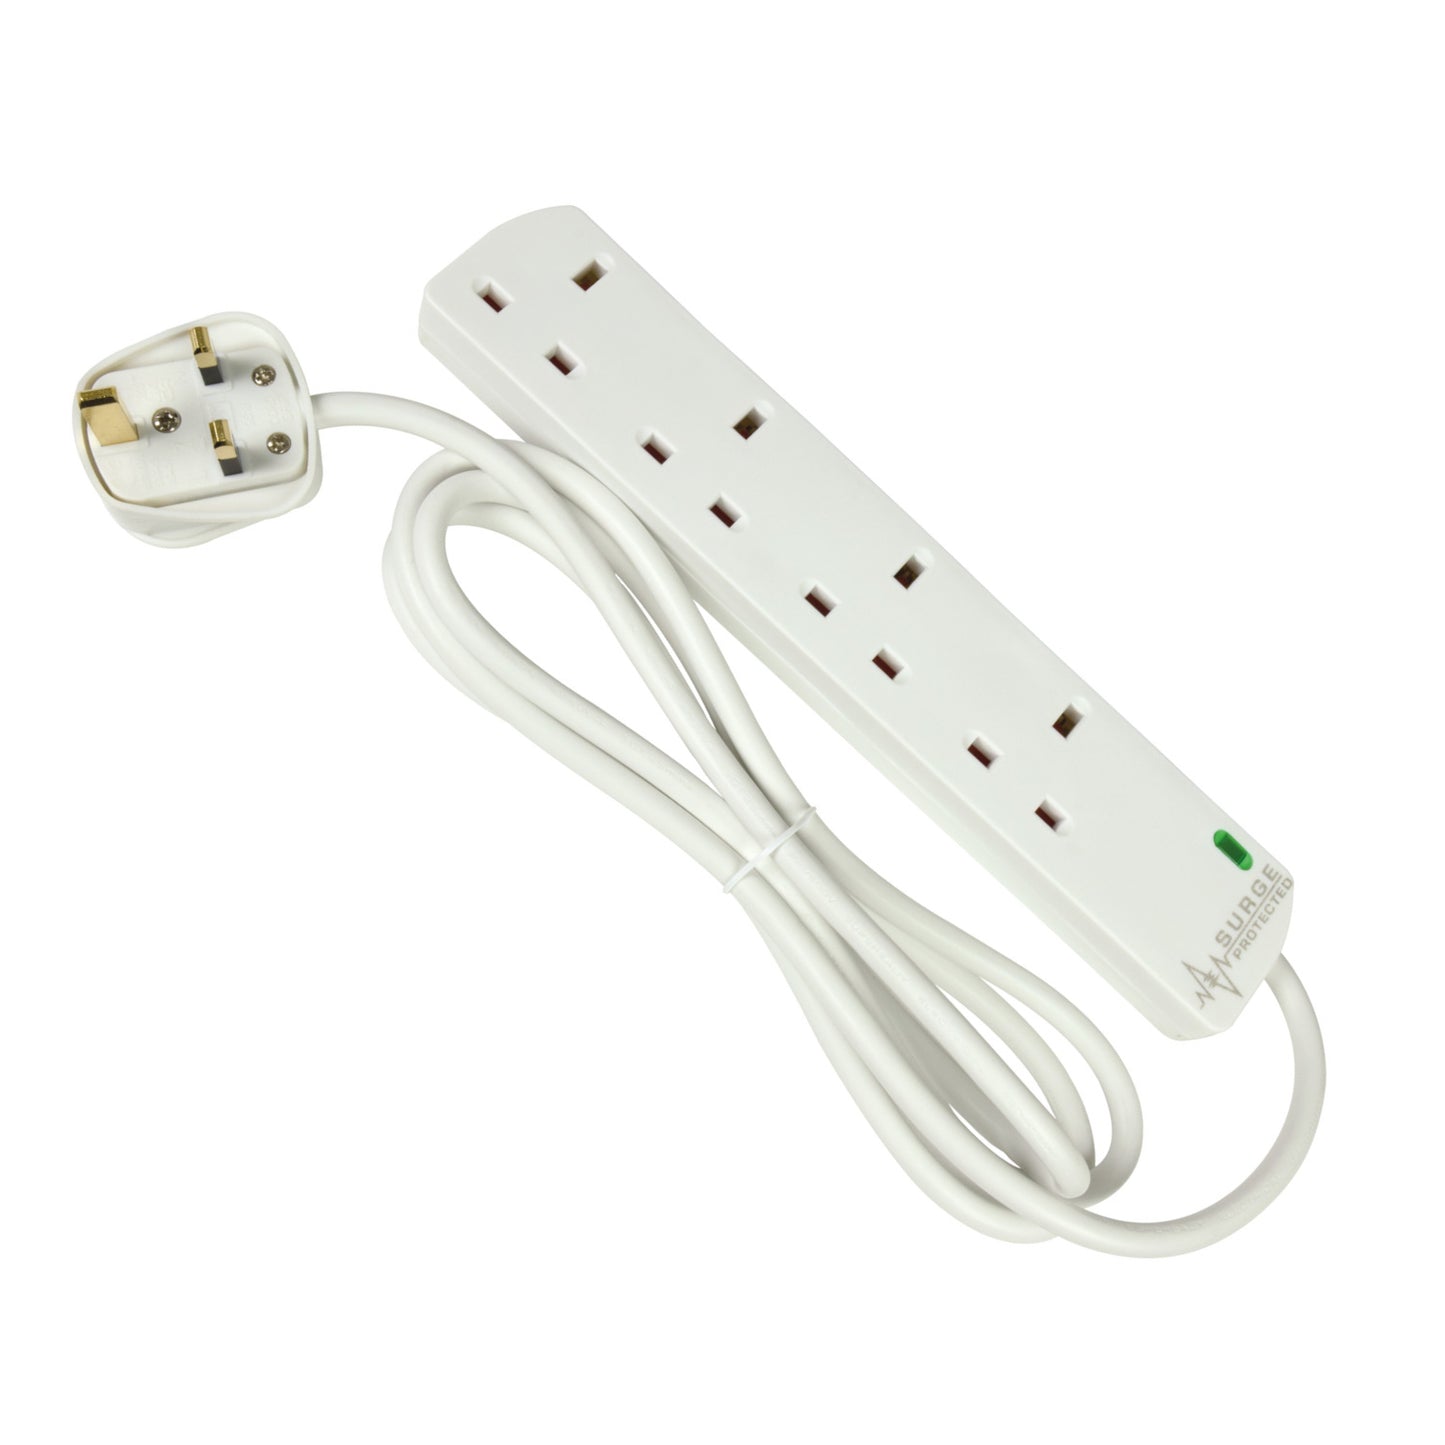 Mercury 4 Gang Mains Extension Lead with Surge Protection